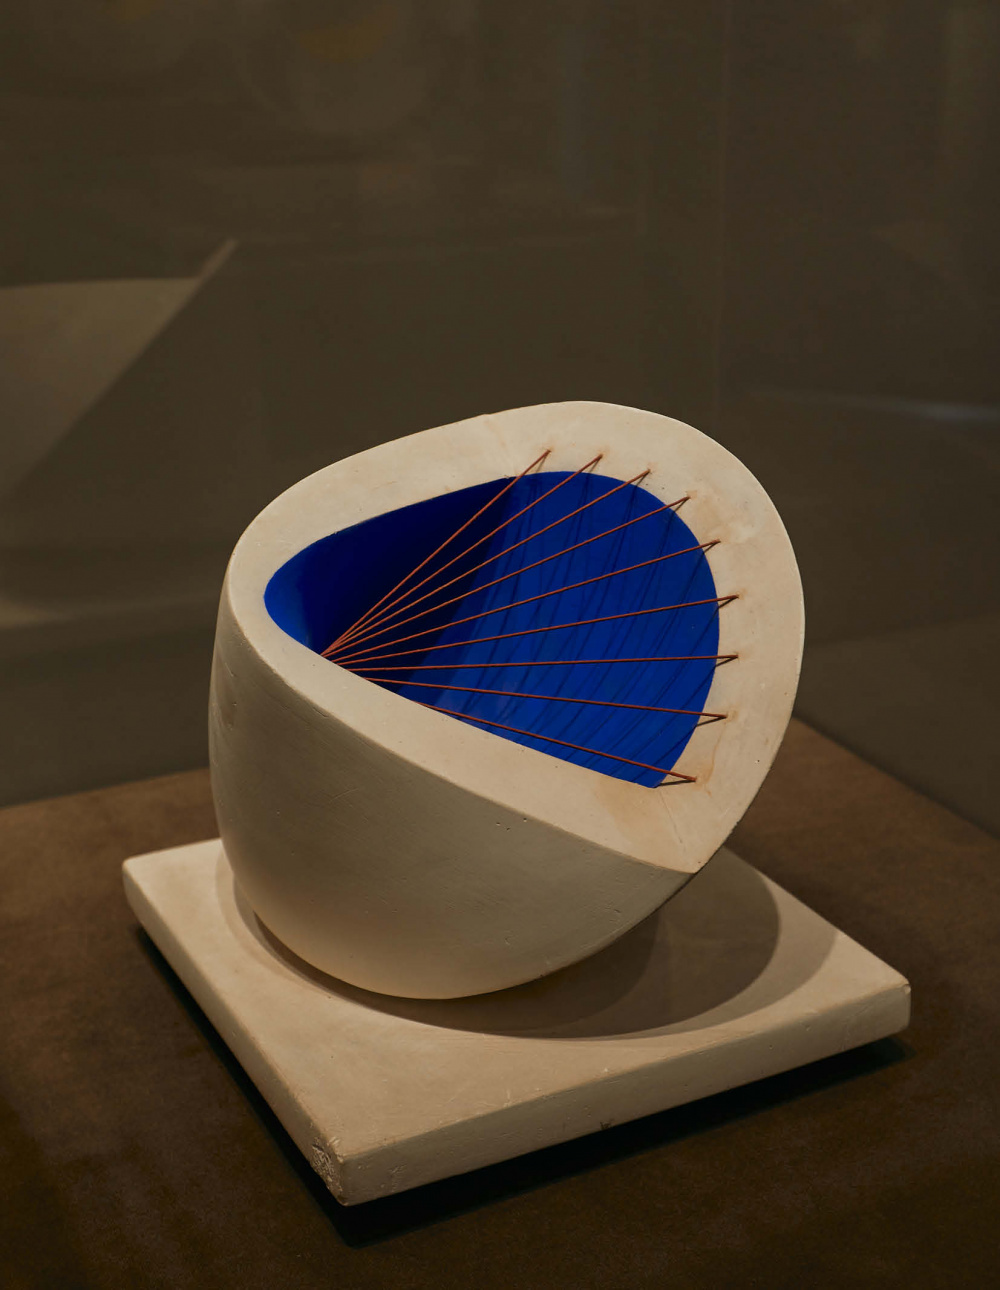 Barbara Hepworth, <em>Sculpture with Colour (Deep Blue and Red)</em>, 1940, Plaster and string on plaster base. Image courtesy of The Design Files. Photo: Amelia Stanwix